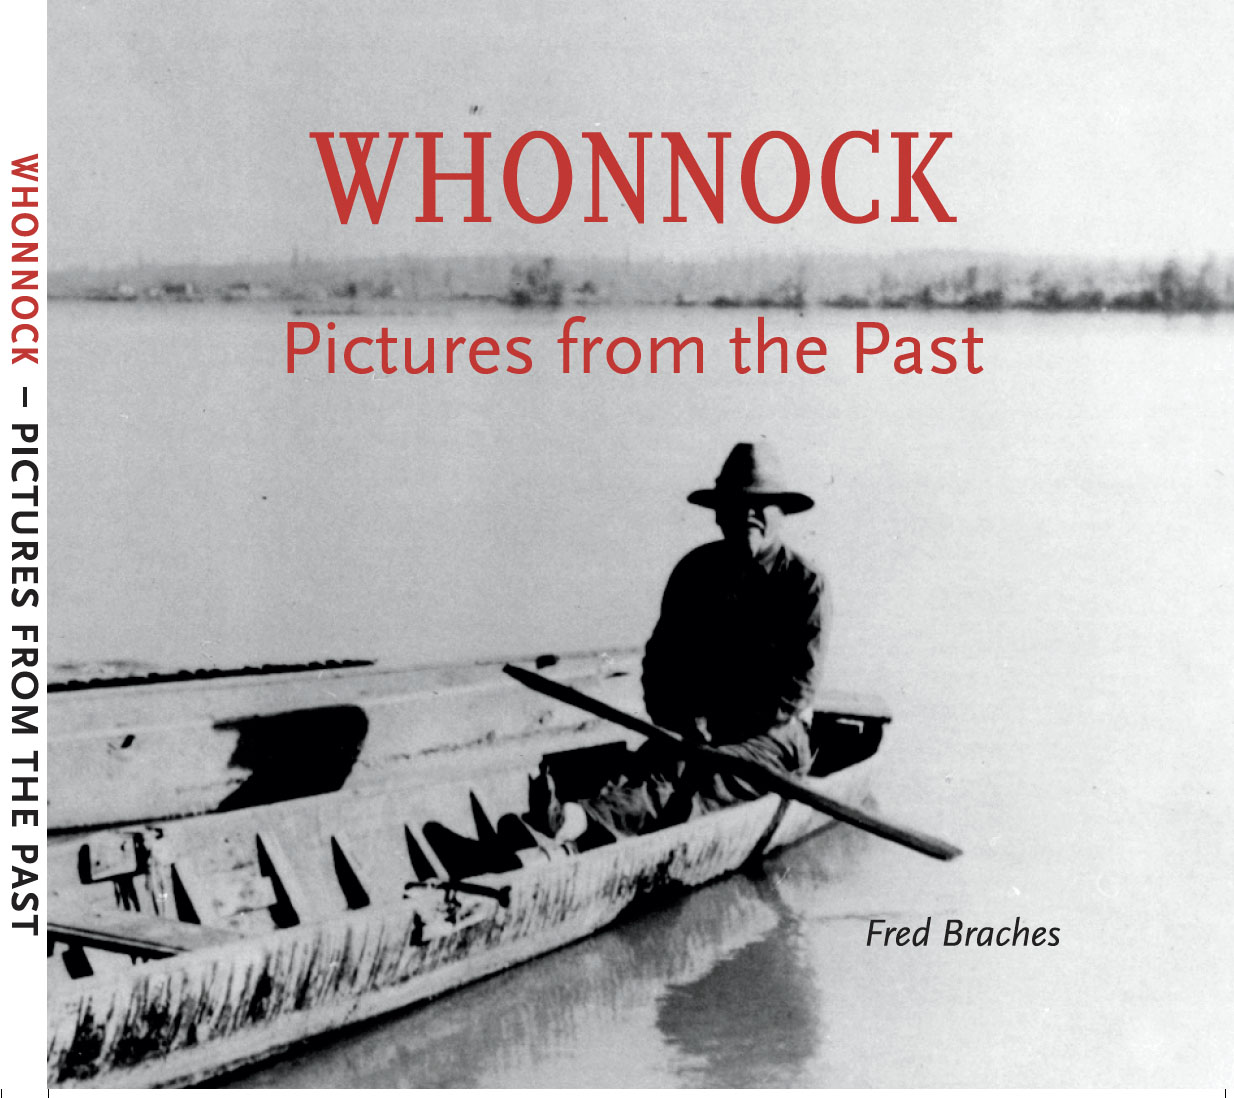 Whonnock: Pictures from the Past